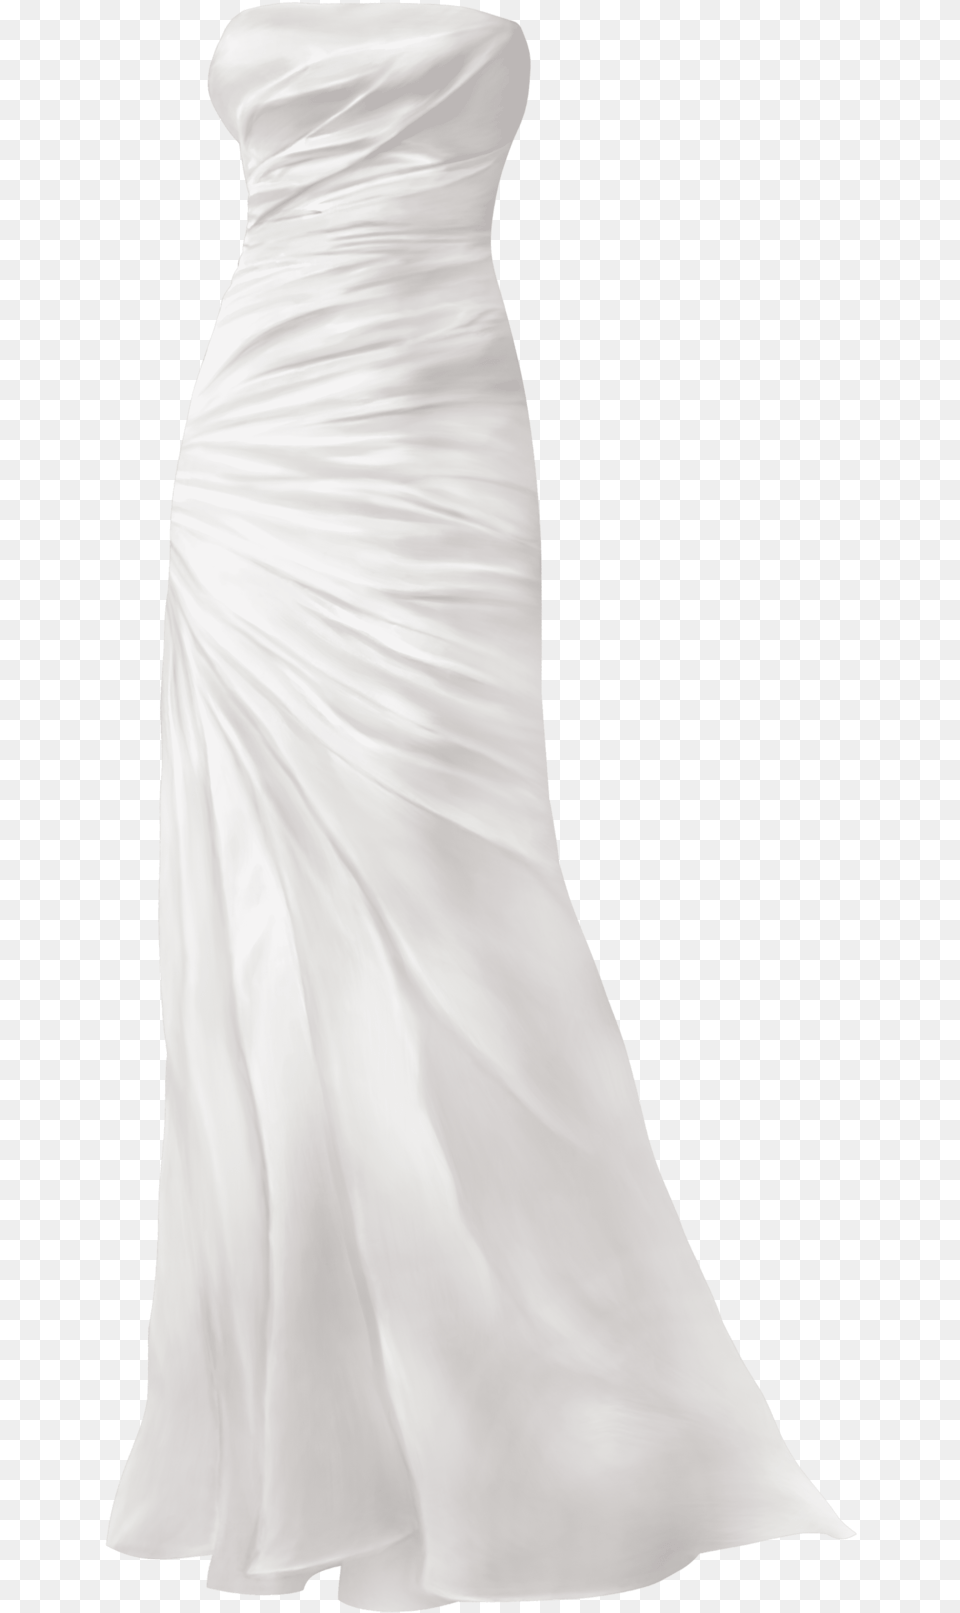 Simple Wedding Dress Gown, Wedding Gown, Clothing, Fashion, Formal Wear Png